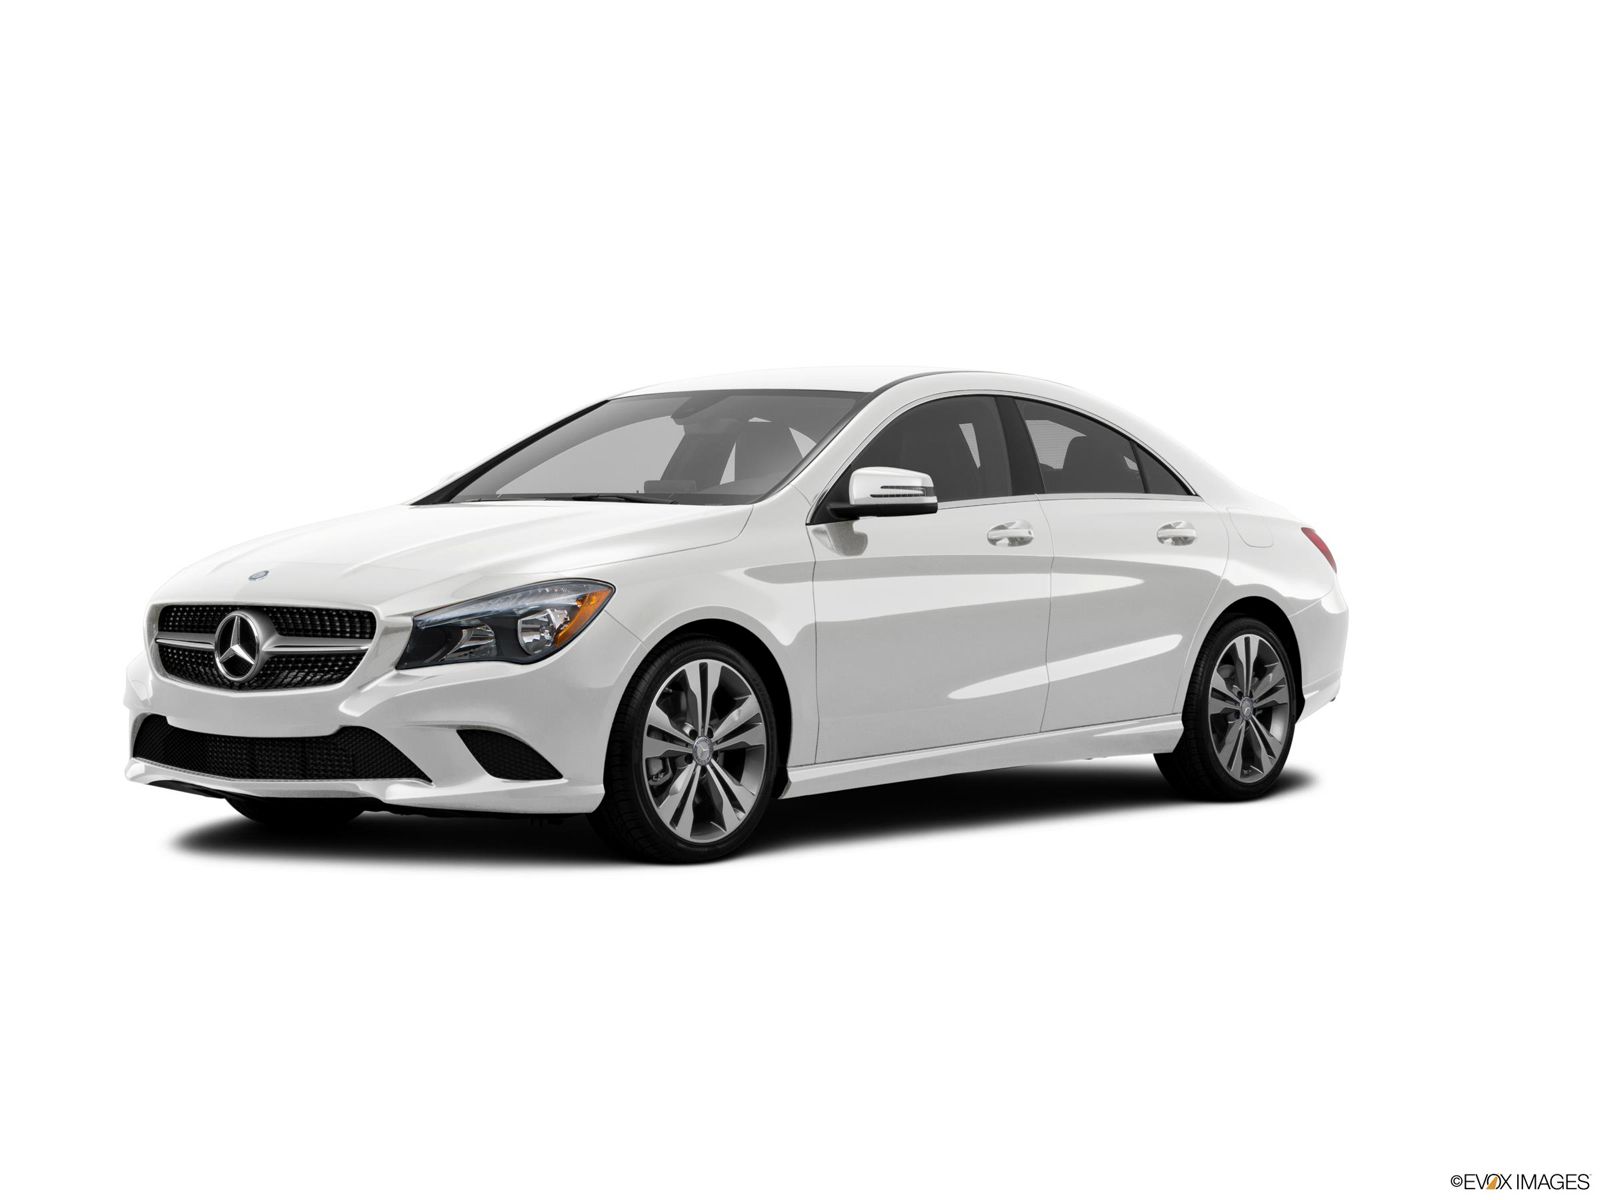 2015 Mercedes-Benz CLA250 Research, Photos, Specs and Expertise | CarMax